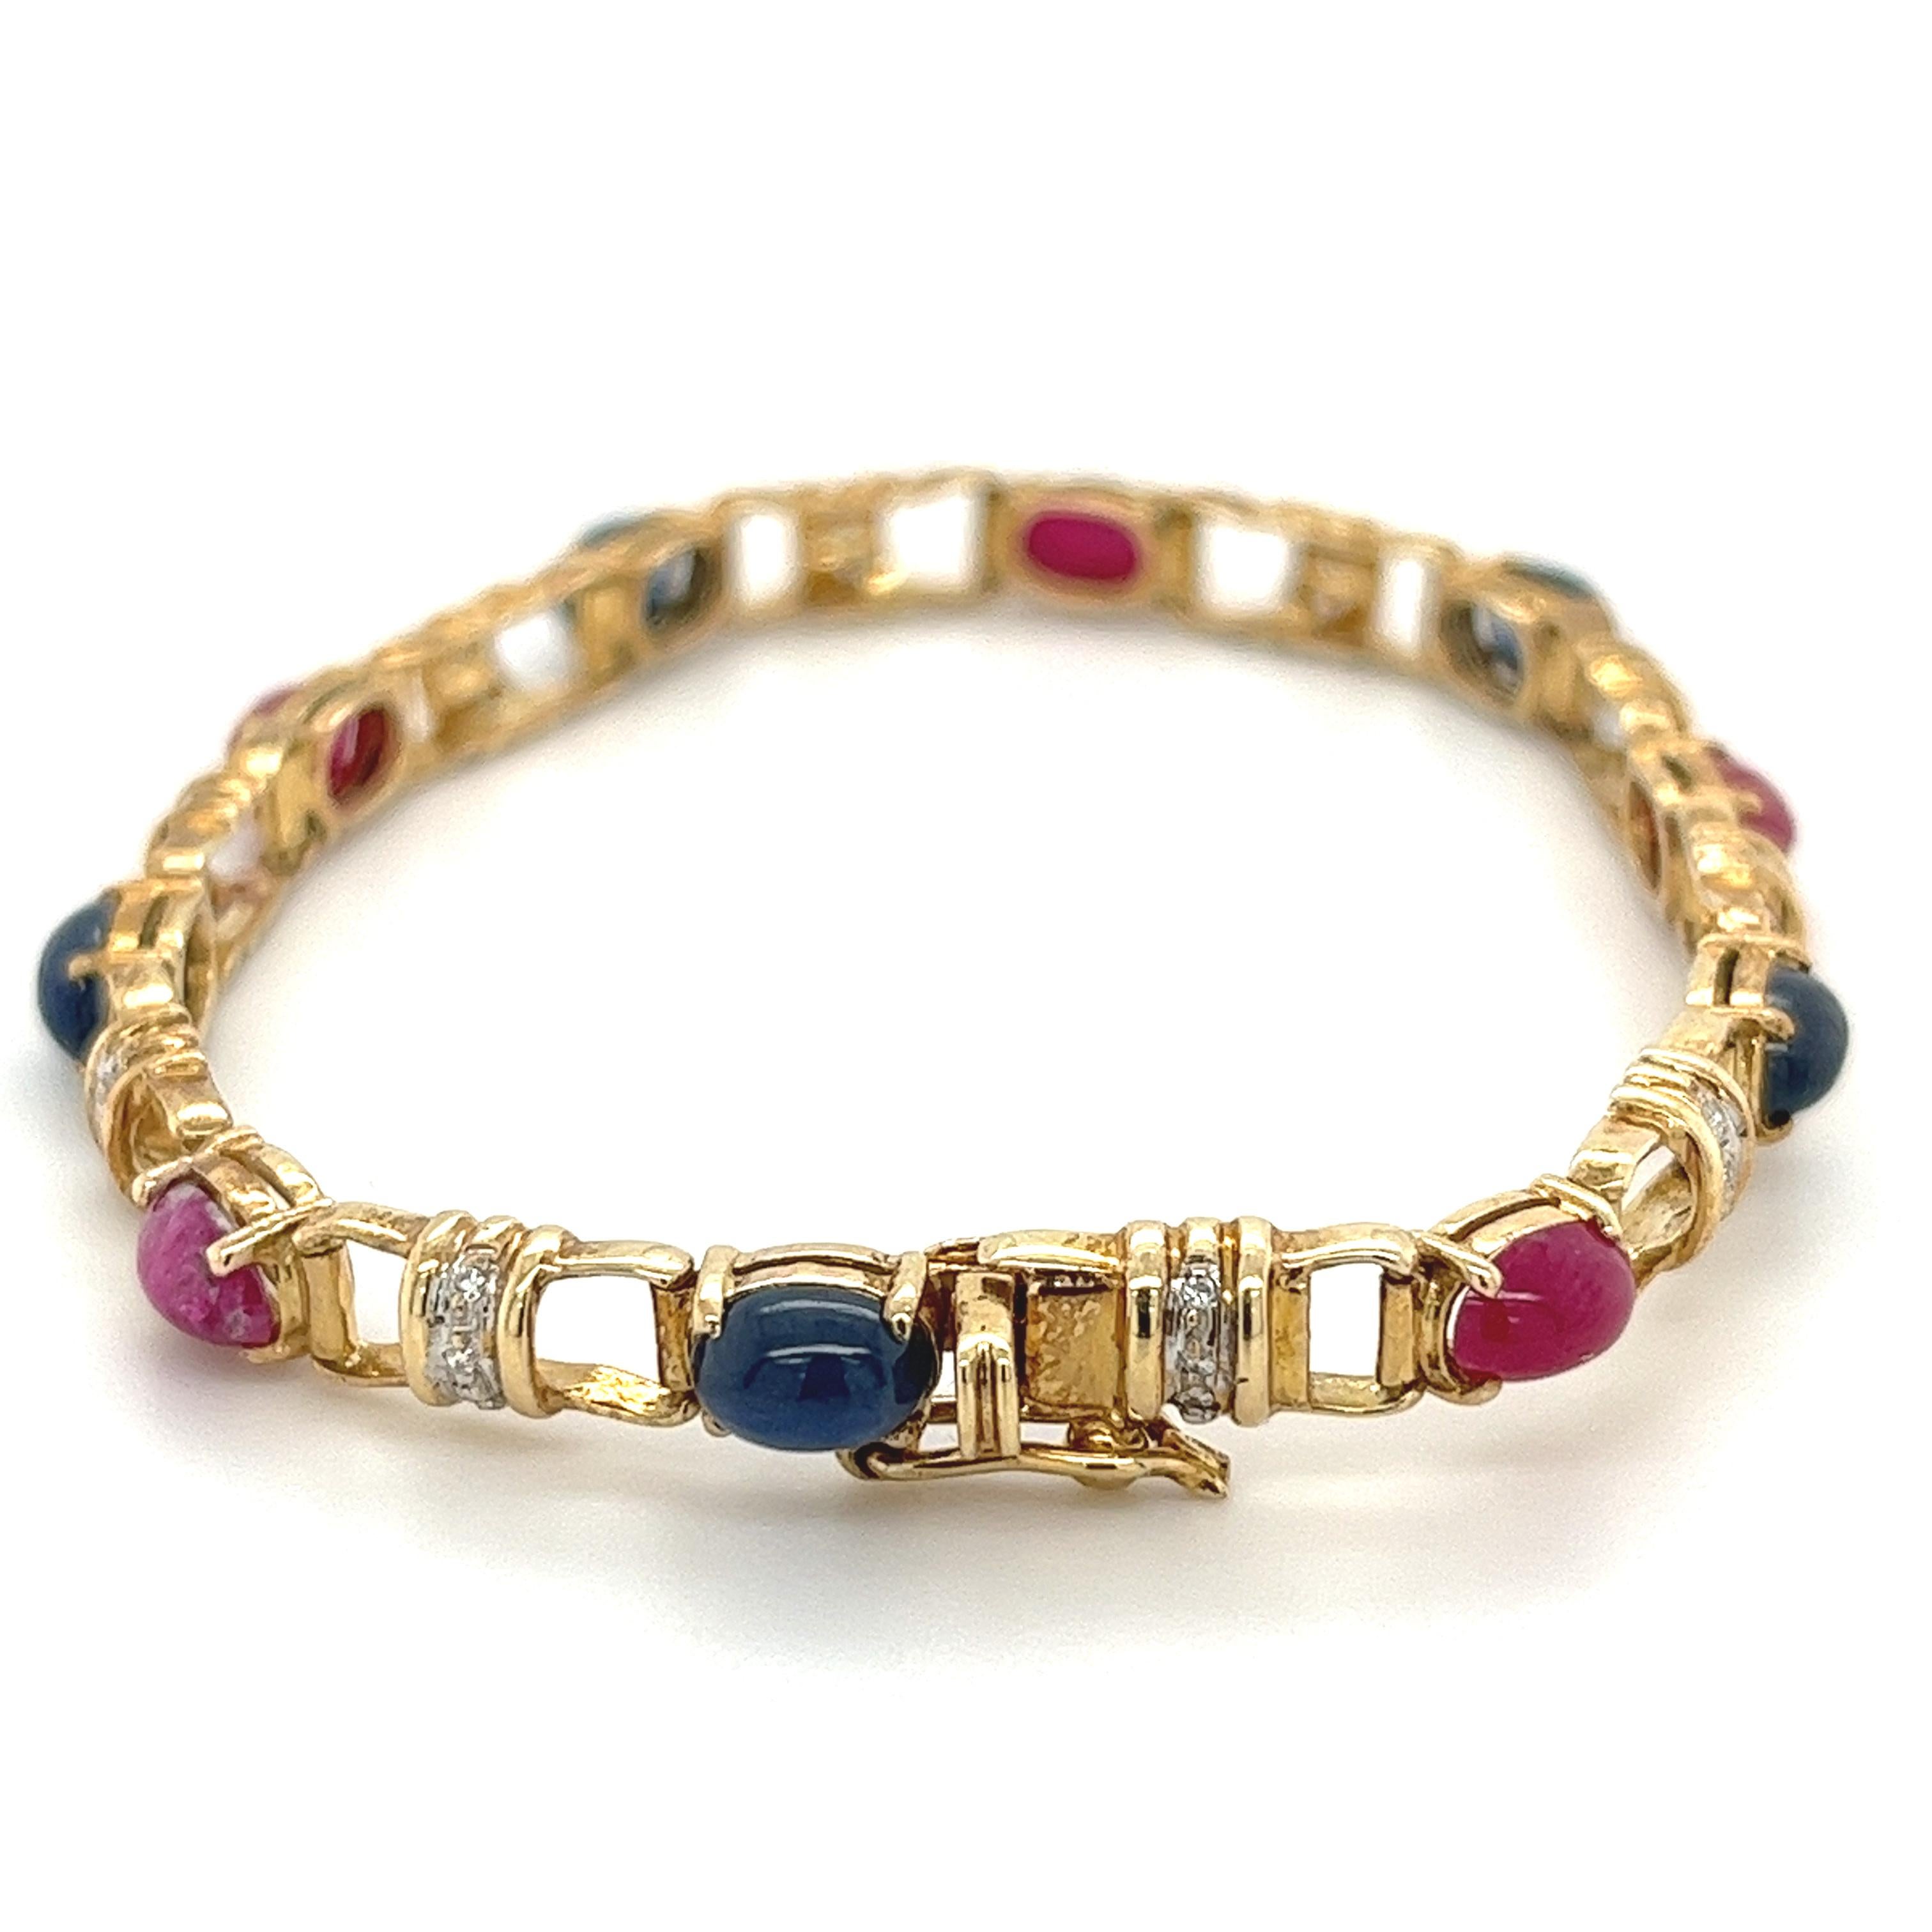 Colorful multi-gemstone retro charm style bracelet in 18k yellow gold. Featuring 10 cabochon cut Rubies and Blue Sapphires. Each Blue Sapphire and Ruby is distinctly separated with 0.30ctw in white diamonds. 

Waterproof, hypoallergenic, and